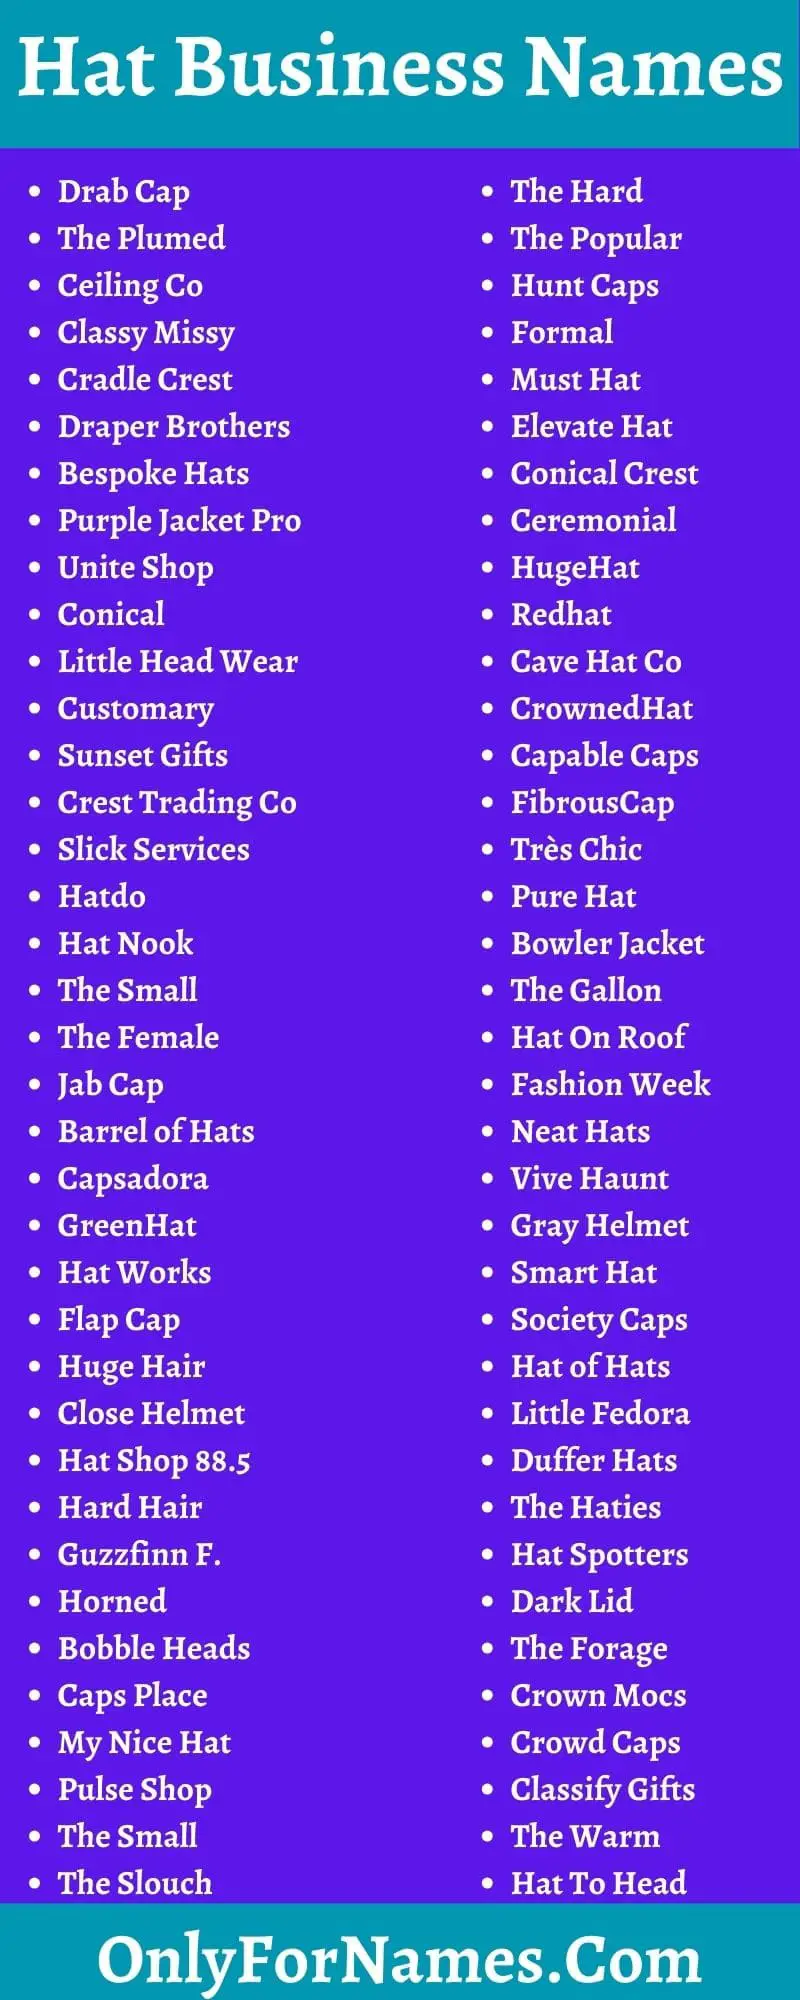 Hat Business Names